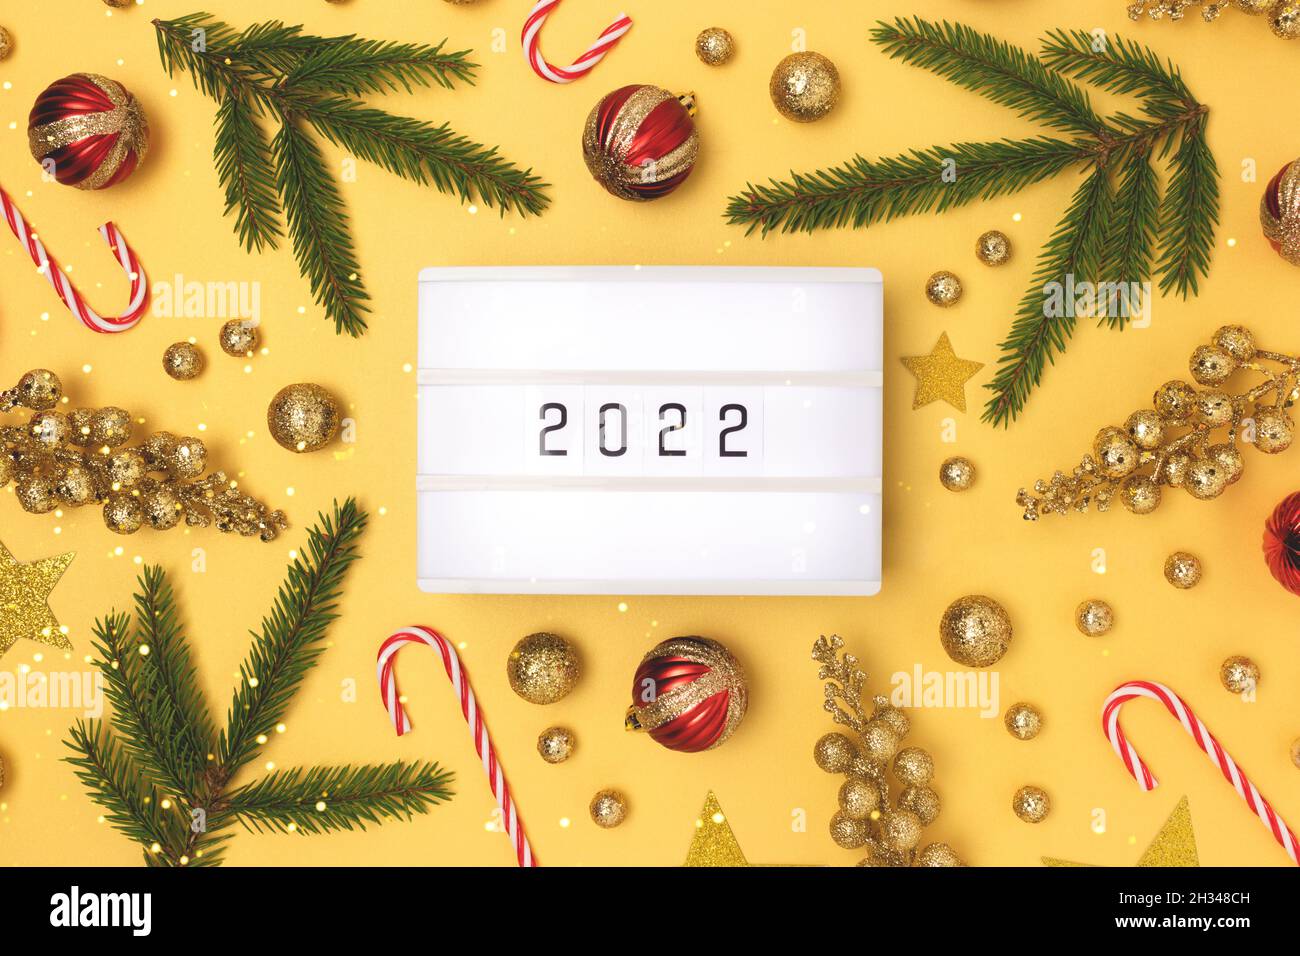 Lightbox with 2022 numbers. New Year decorations on a golden background. Stock Photo